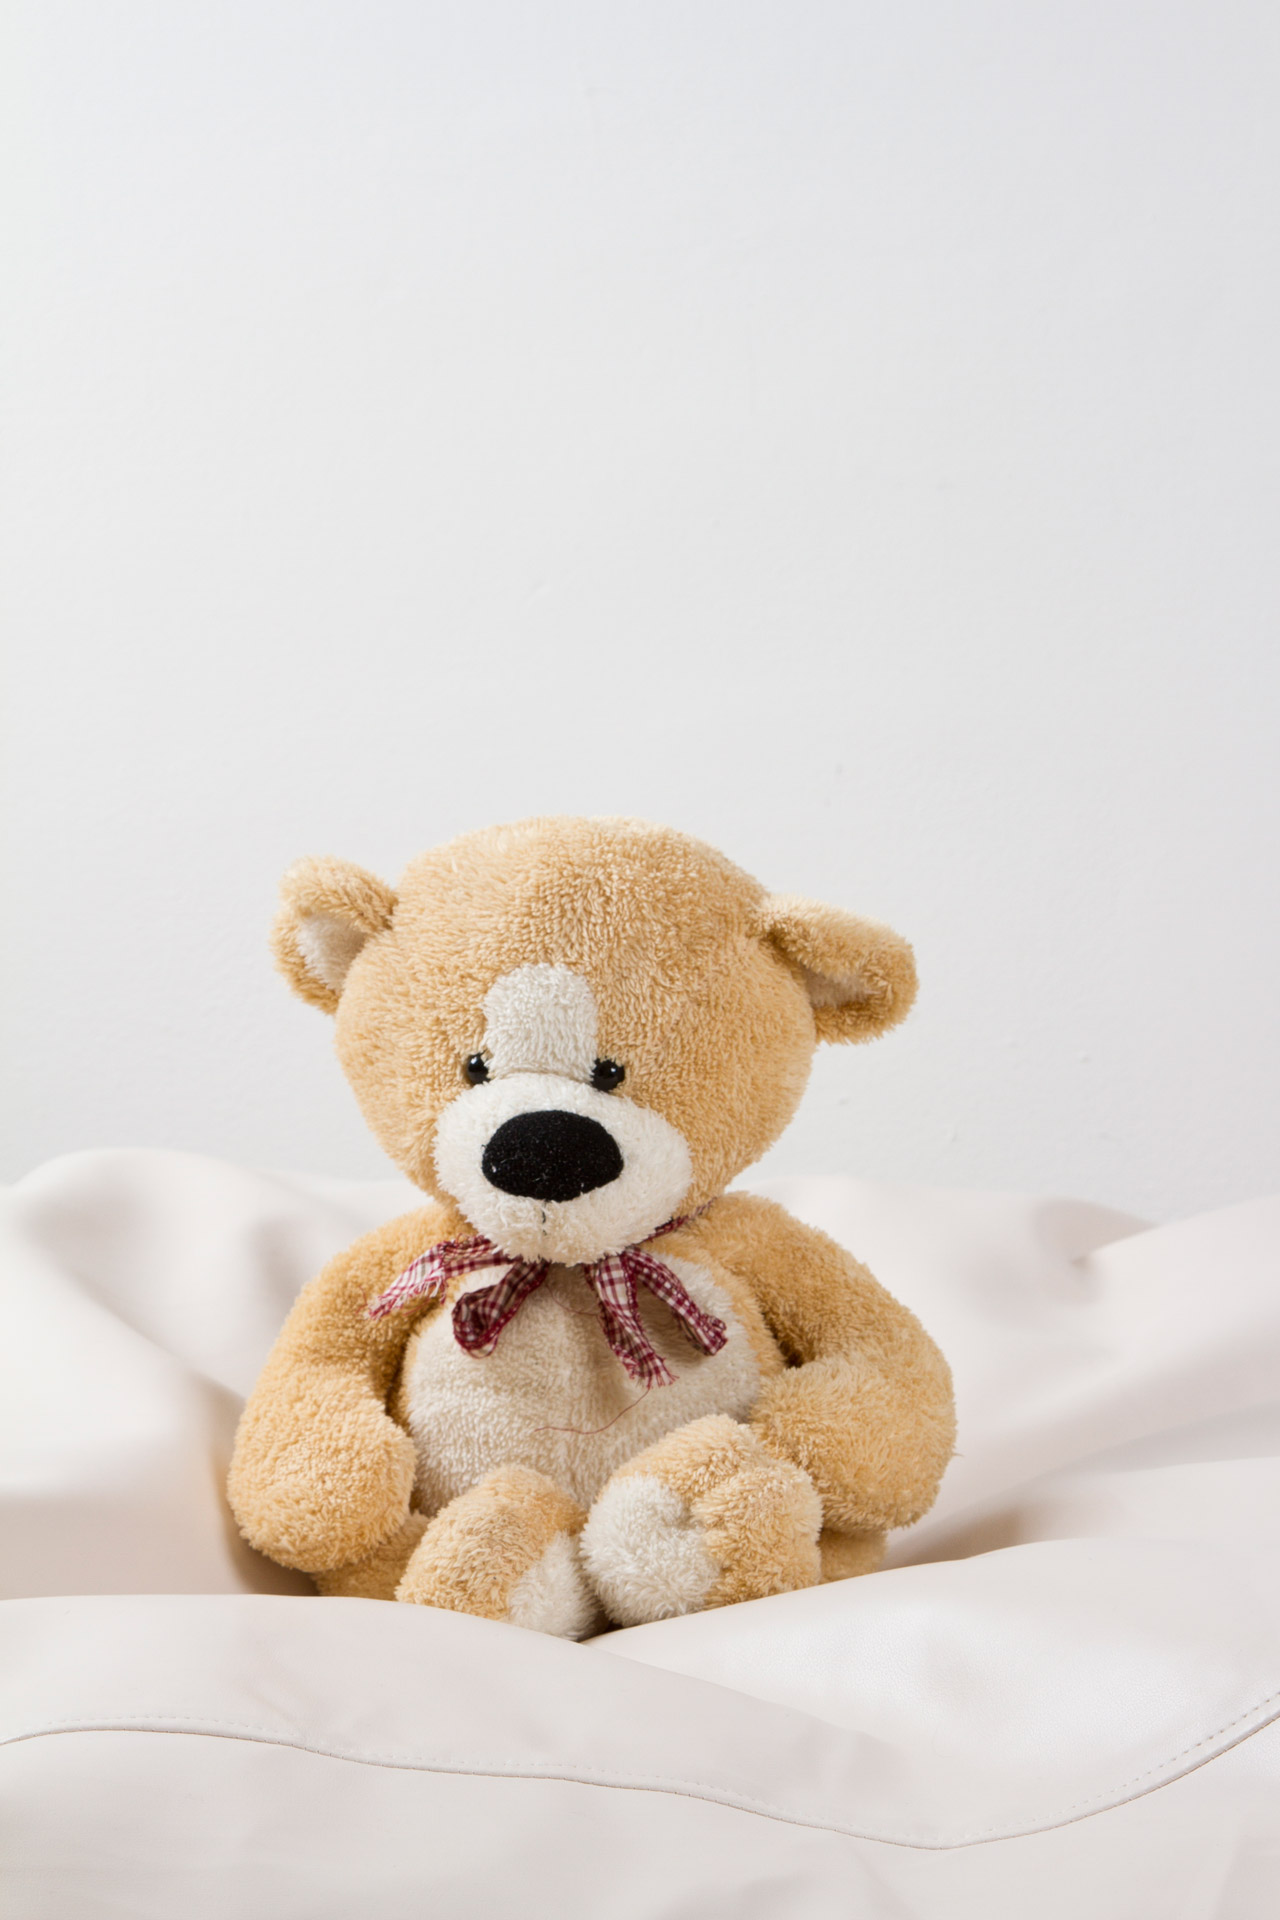 Teddy Free Stock Photo - Public Domain Pictures